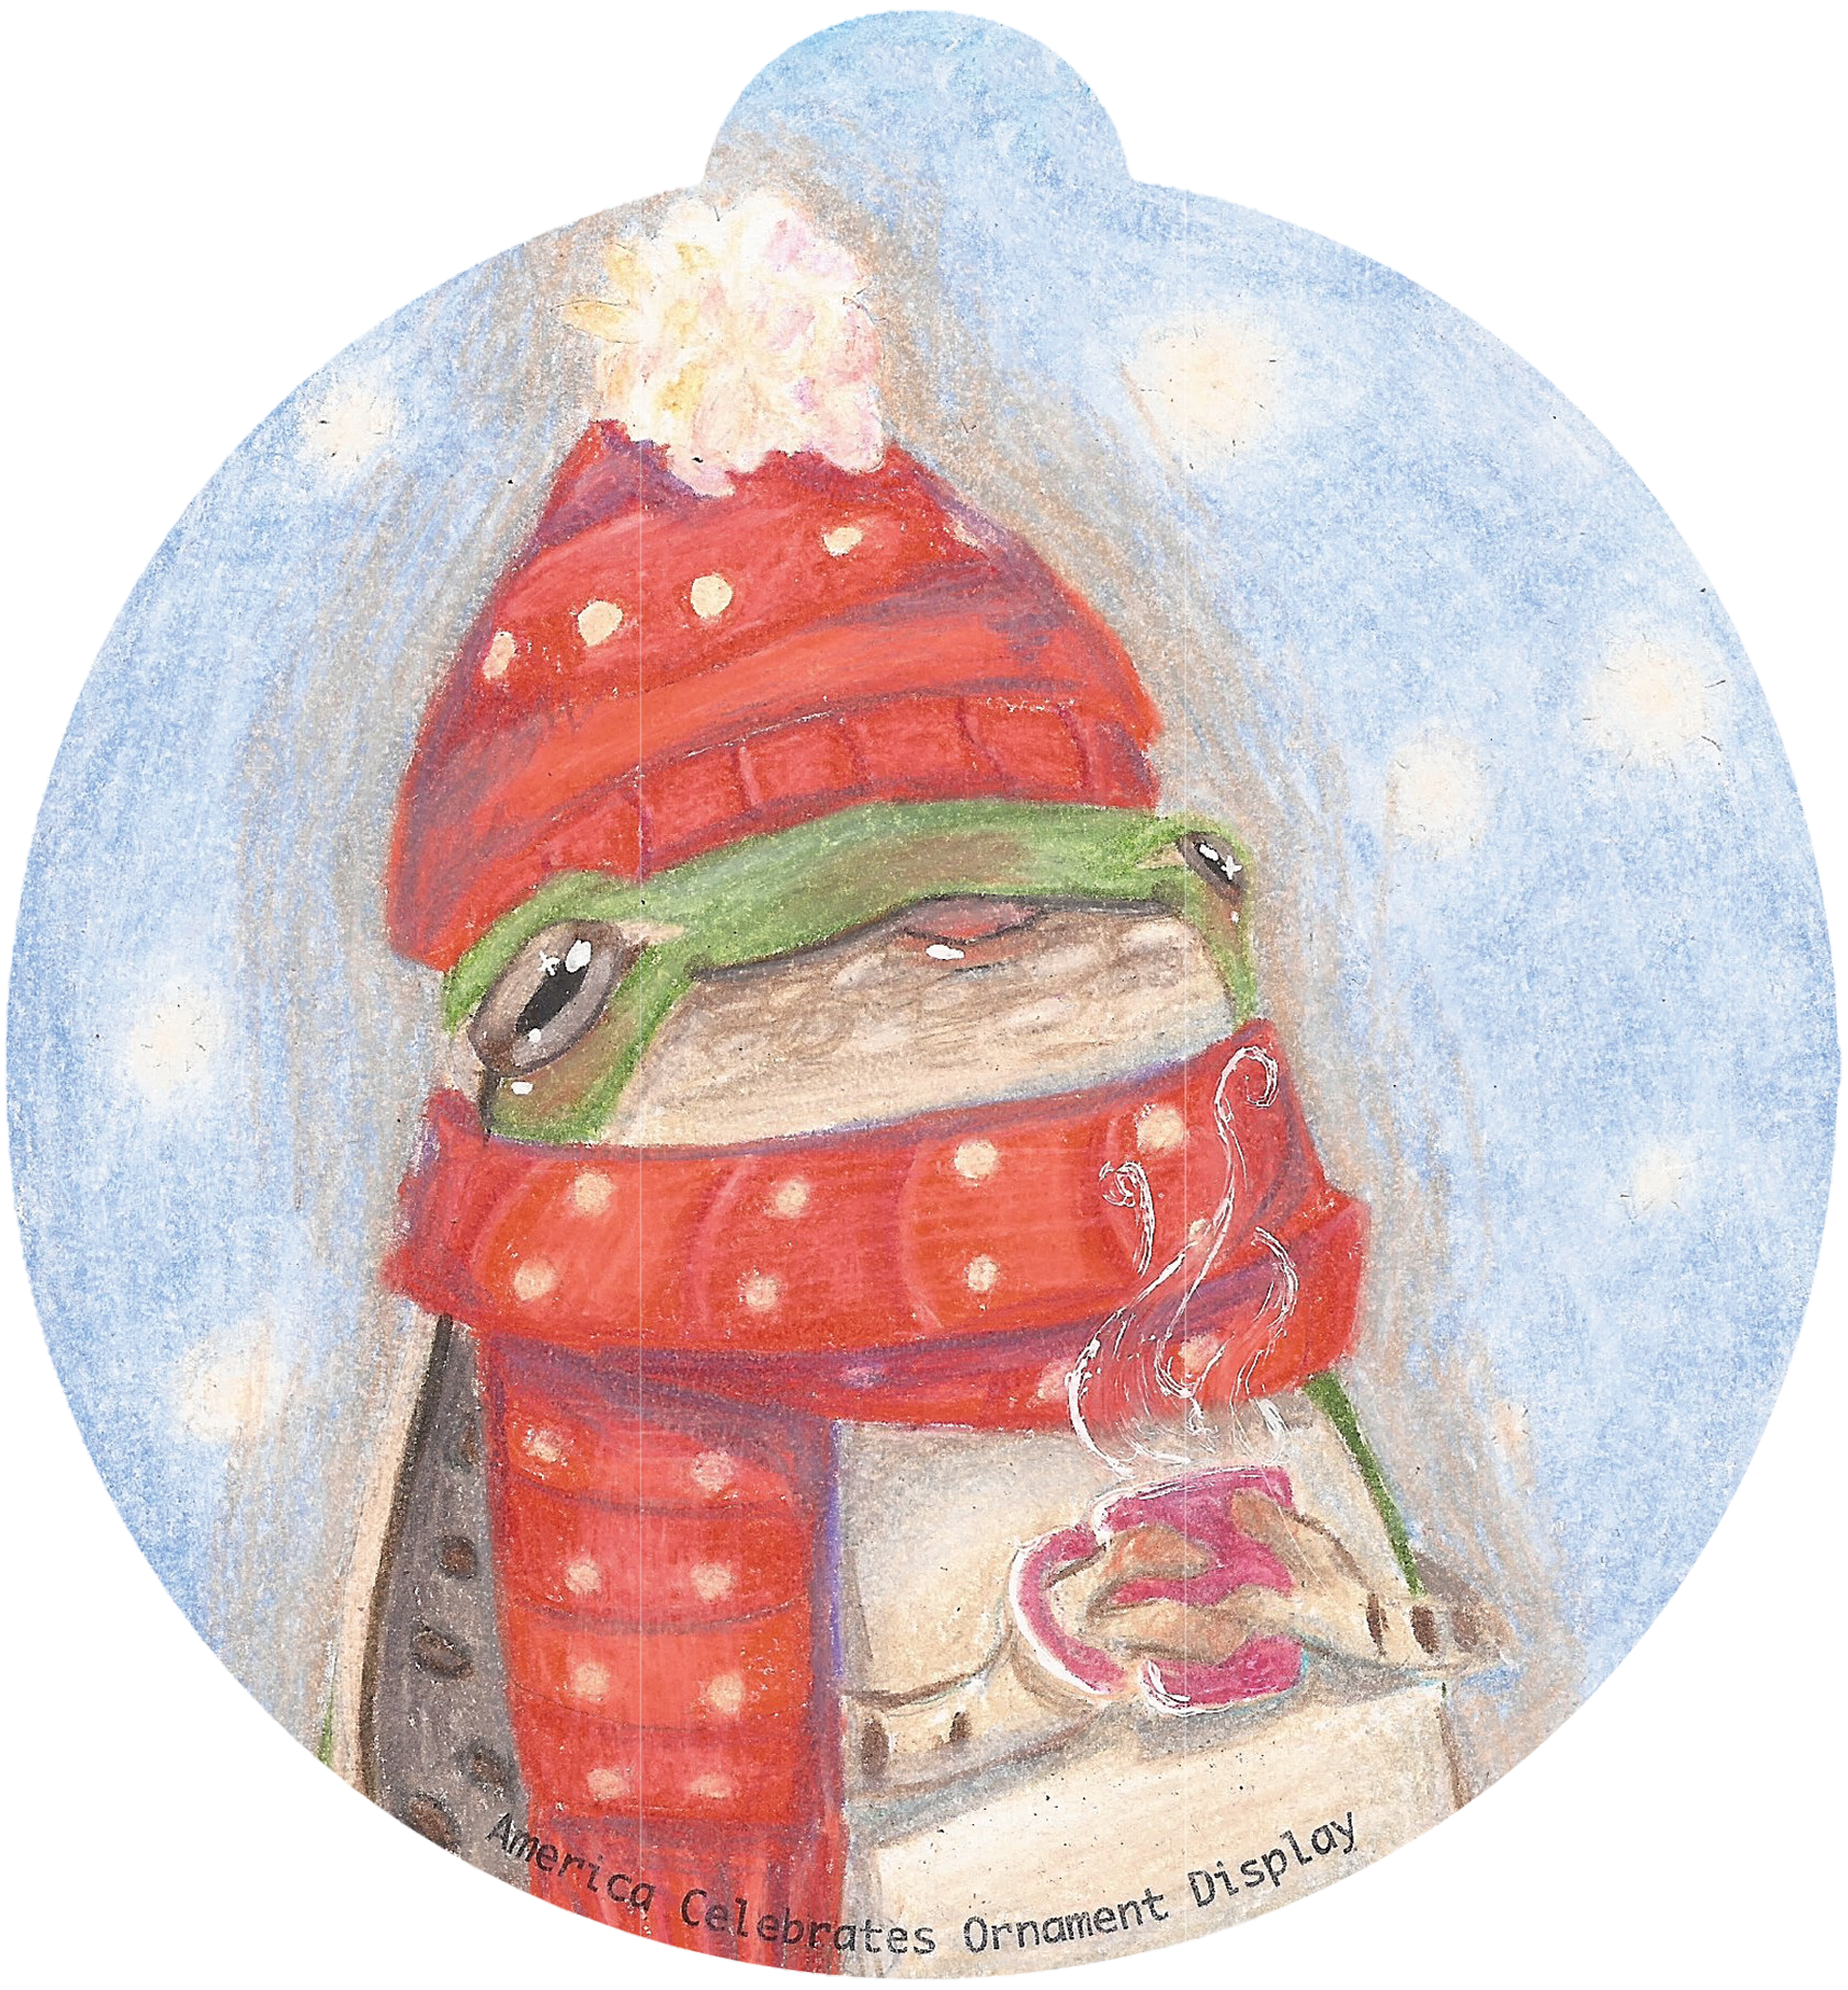 ornament depicting a frog in winter garb clutching a mug of hot beverage